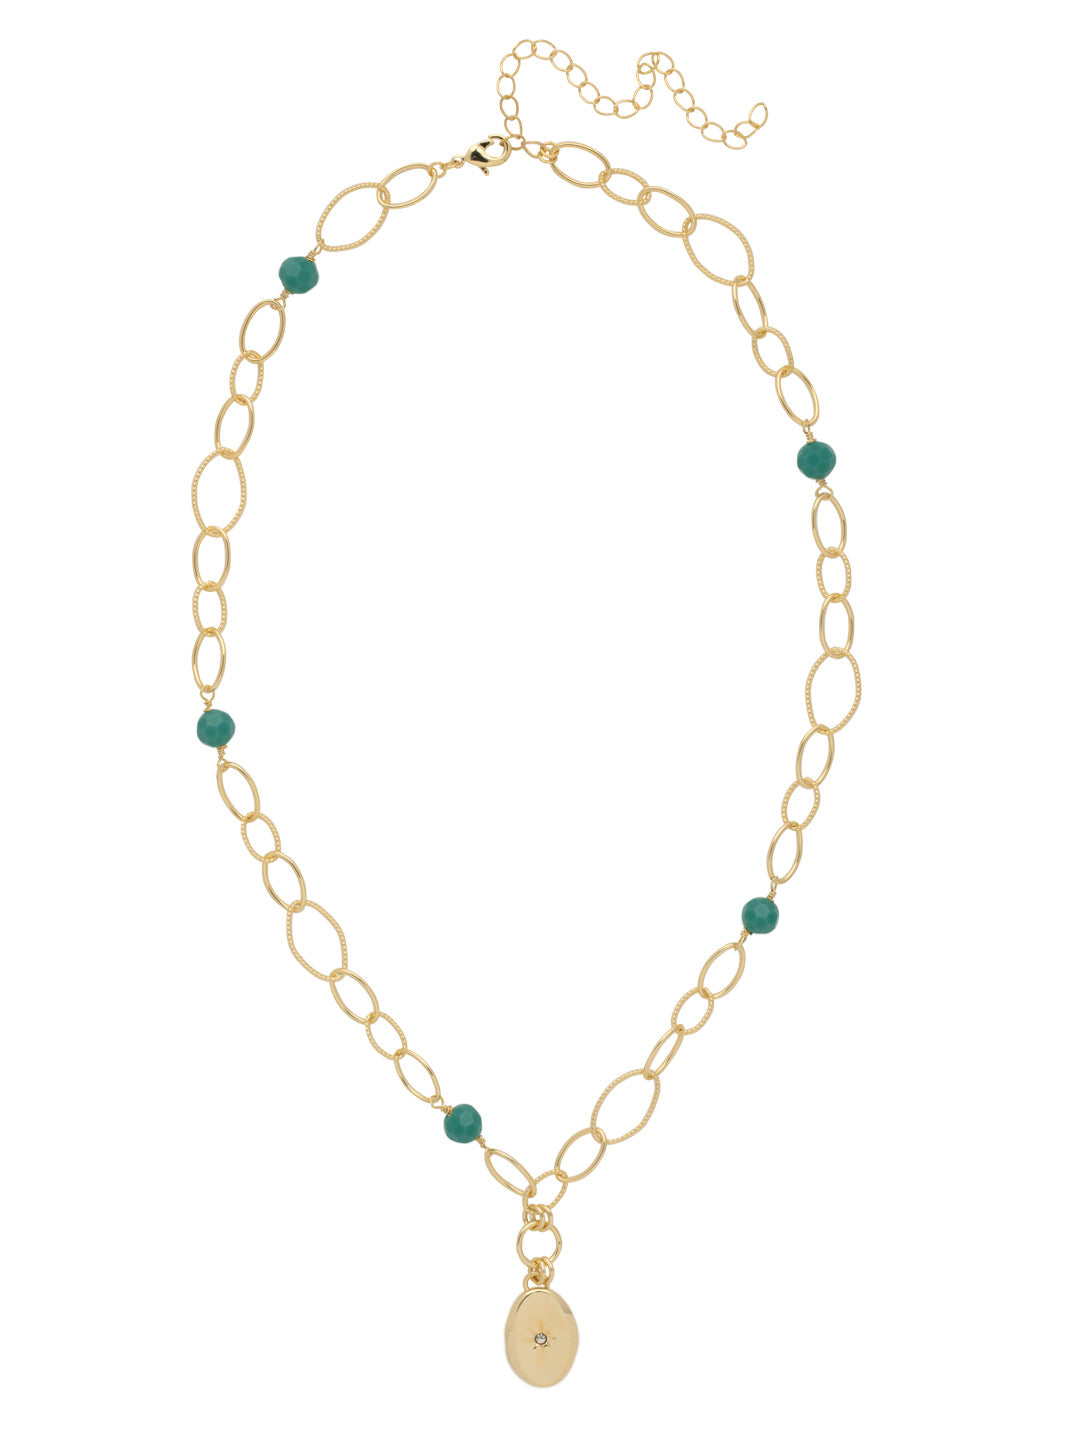 Henley Pendant Necklace - 4NFF80BGTQ - <p>The Henley Pendant Necklace features various chain loops and beads with a star stamped metal pendant on an adjustable chain, secured with a lobster claw clasp. From Sorrelli's Turquoise collection in our Bright Gold-tone finish.</p>